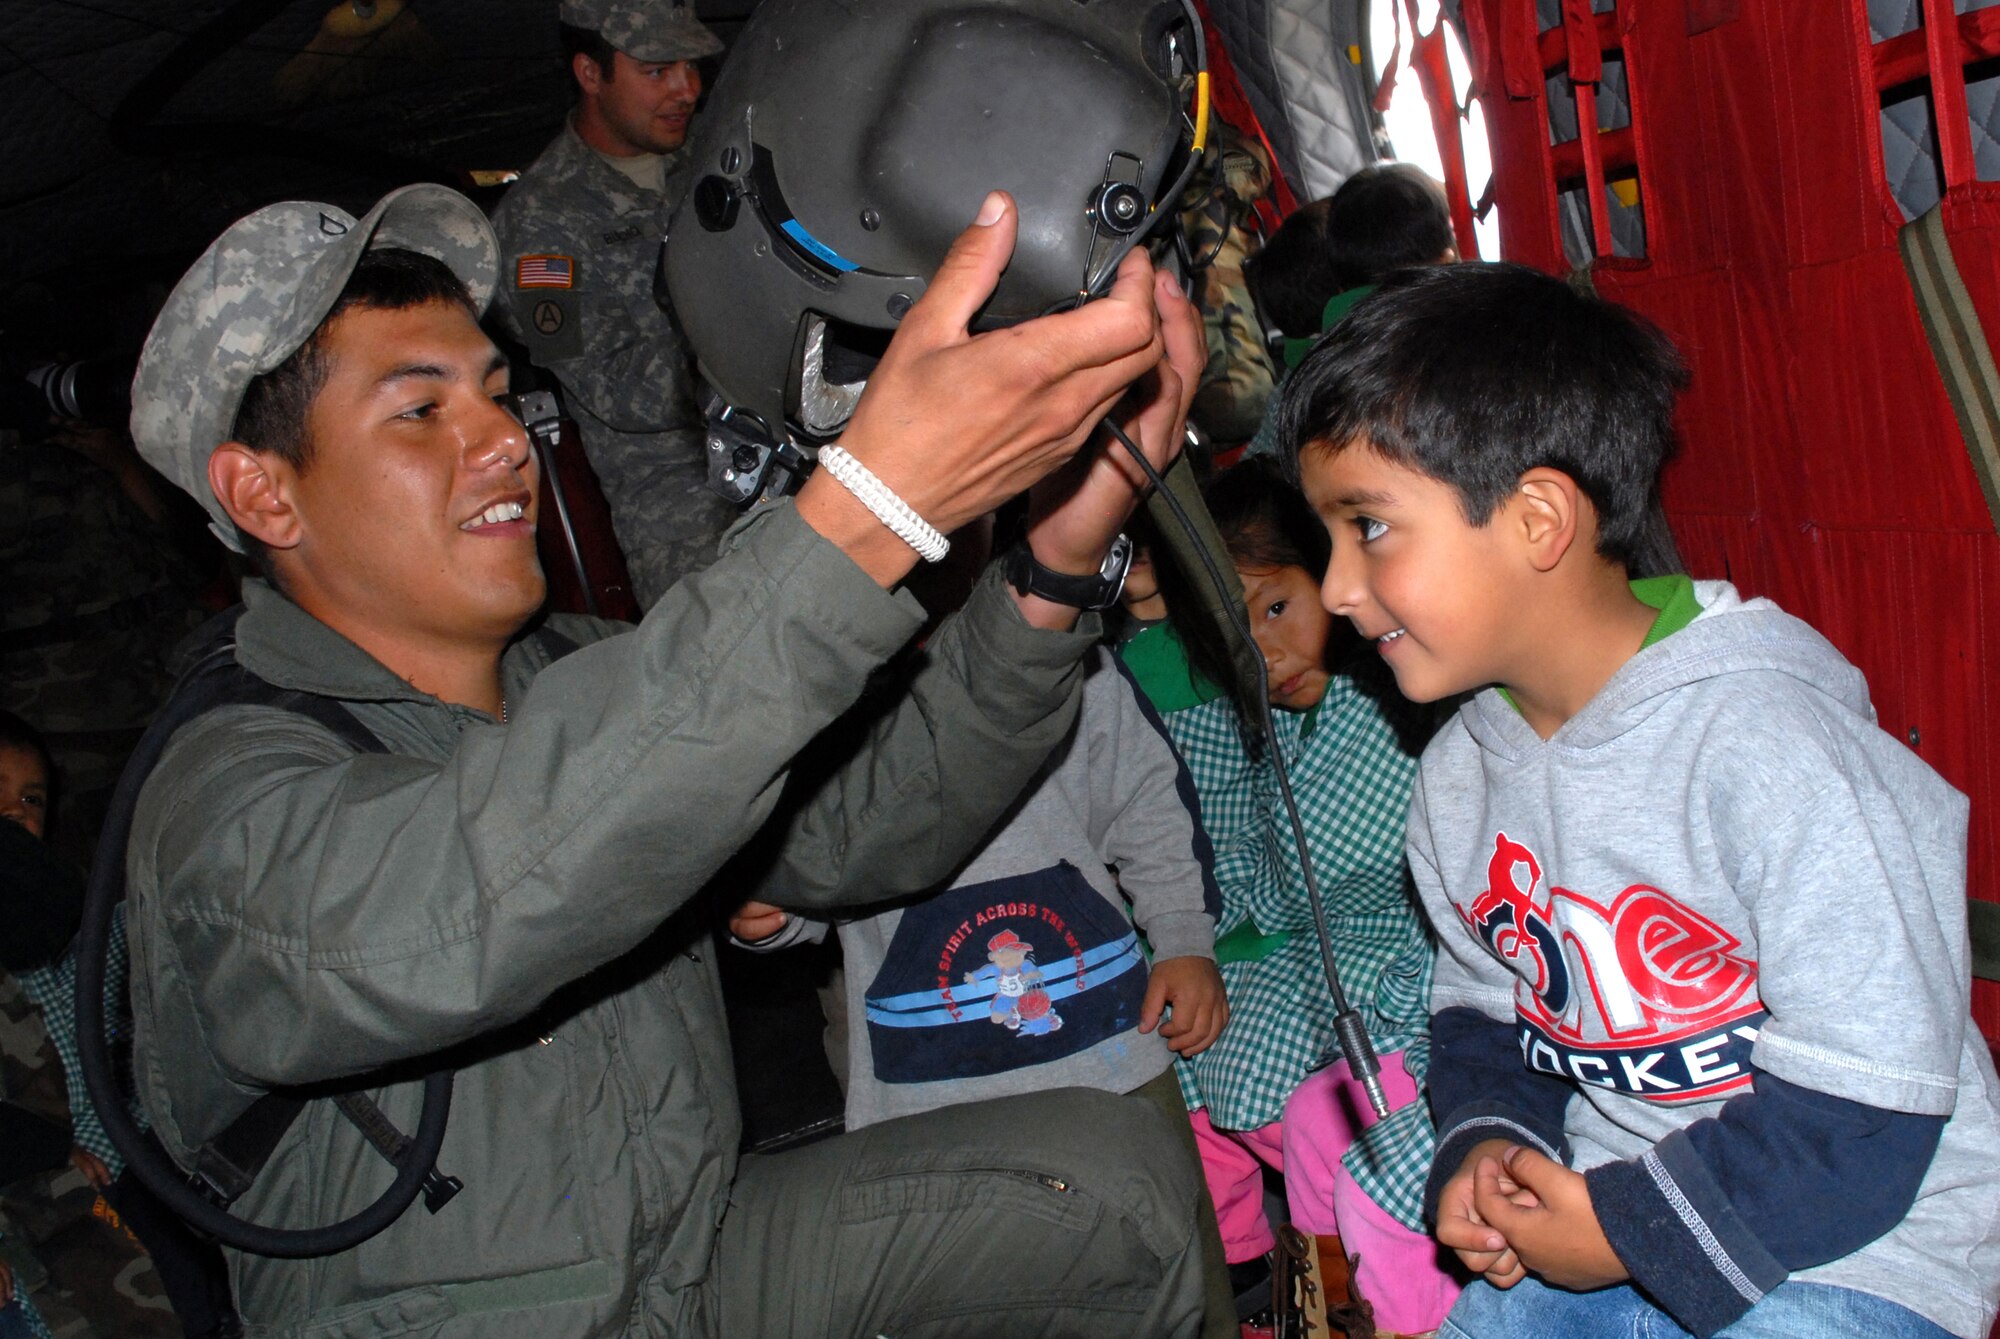 U.S. Army Specialist Josue Moises Coranado-Iglesias, a helicopter engineer assigned to Task Force New Horizons, places a flight helmet on the head of Jose Stephano Diez Zamora, 4, June 11, during their tour of a U.S. CH-47 Chinook helicopter currently assigned to Task Force New Horizons and residing in Los Cabitos, Peru. (U.S. Air Force photo/Tech. Sgt. Kerry Jackson)